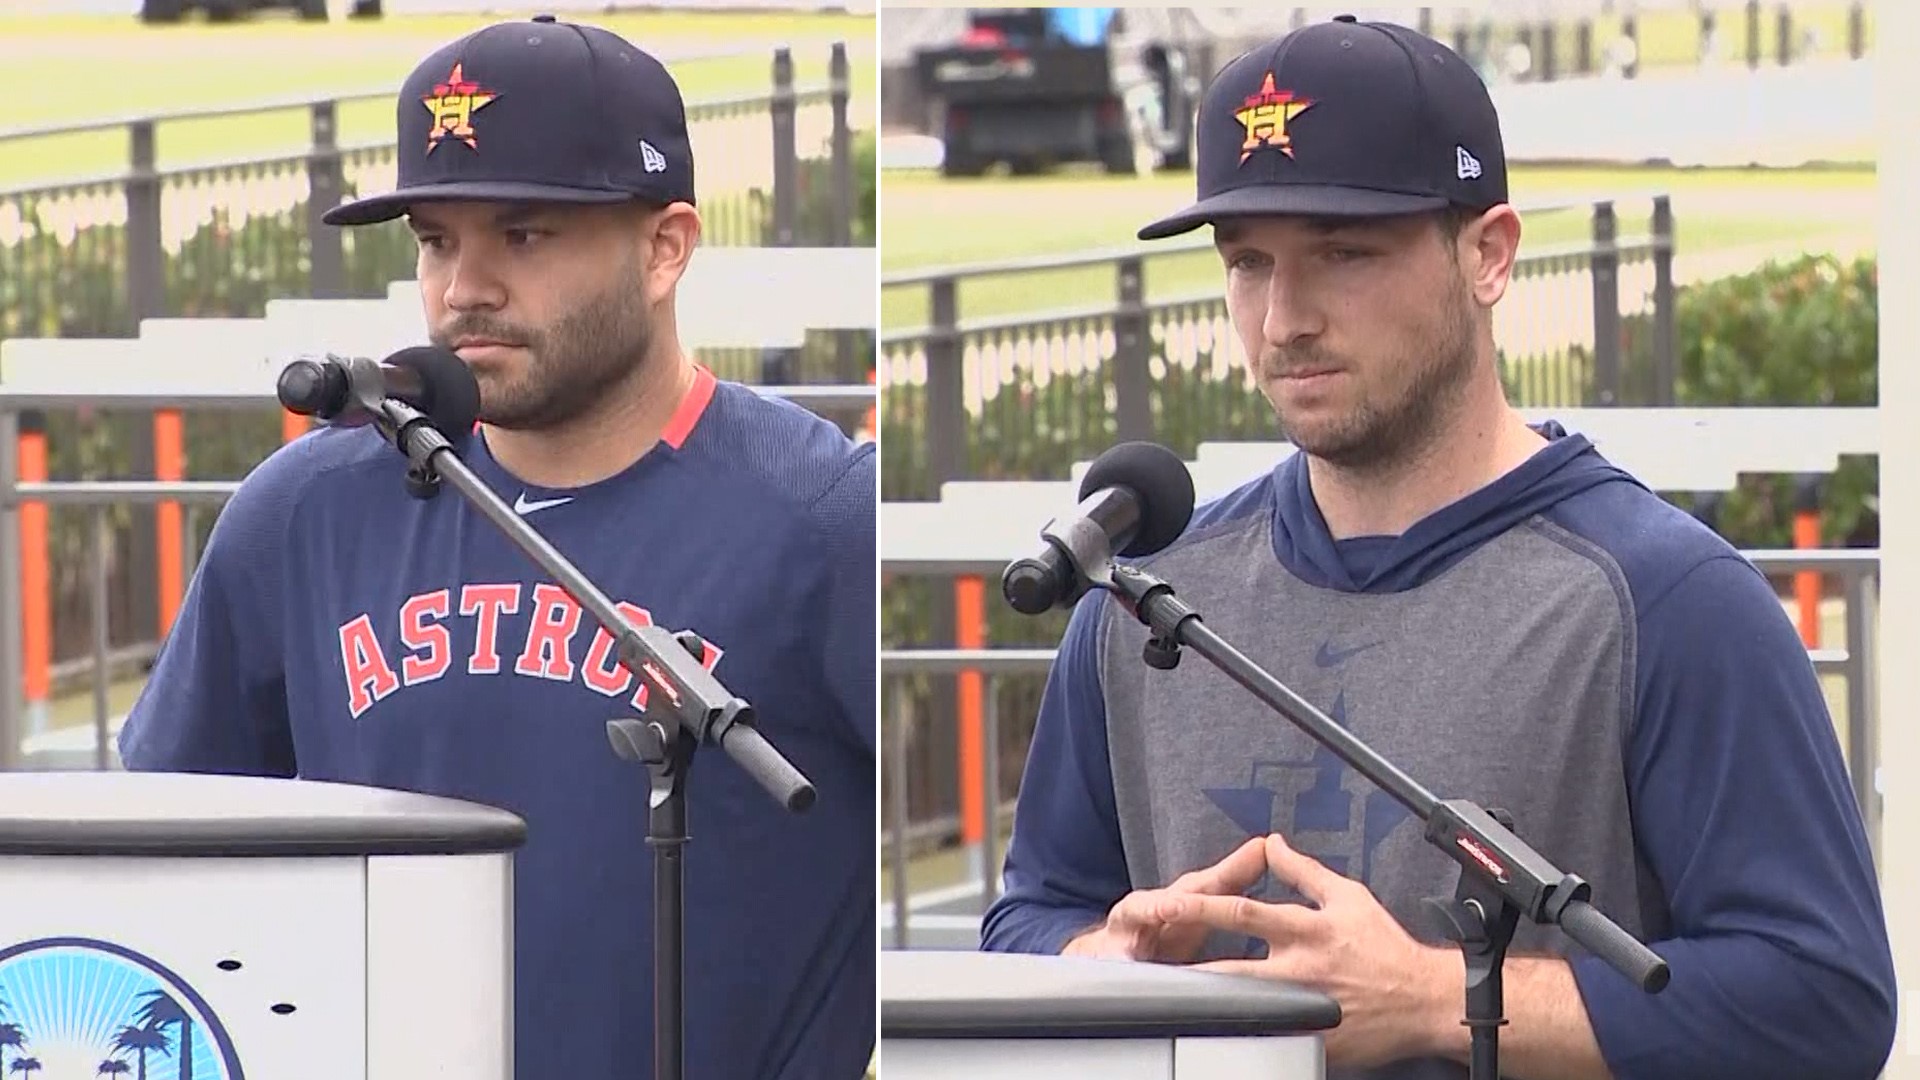 All eyes on the Astros: Altuve, Bregman apologize at morning press conference